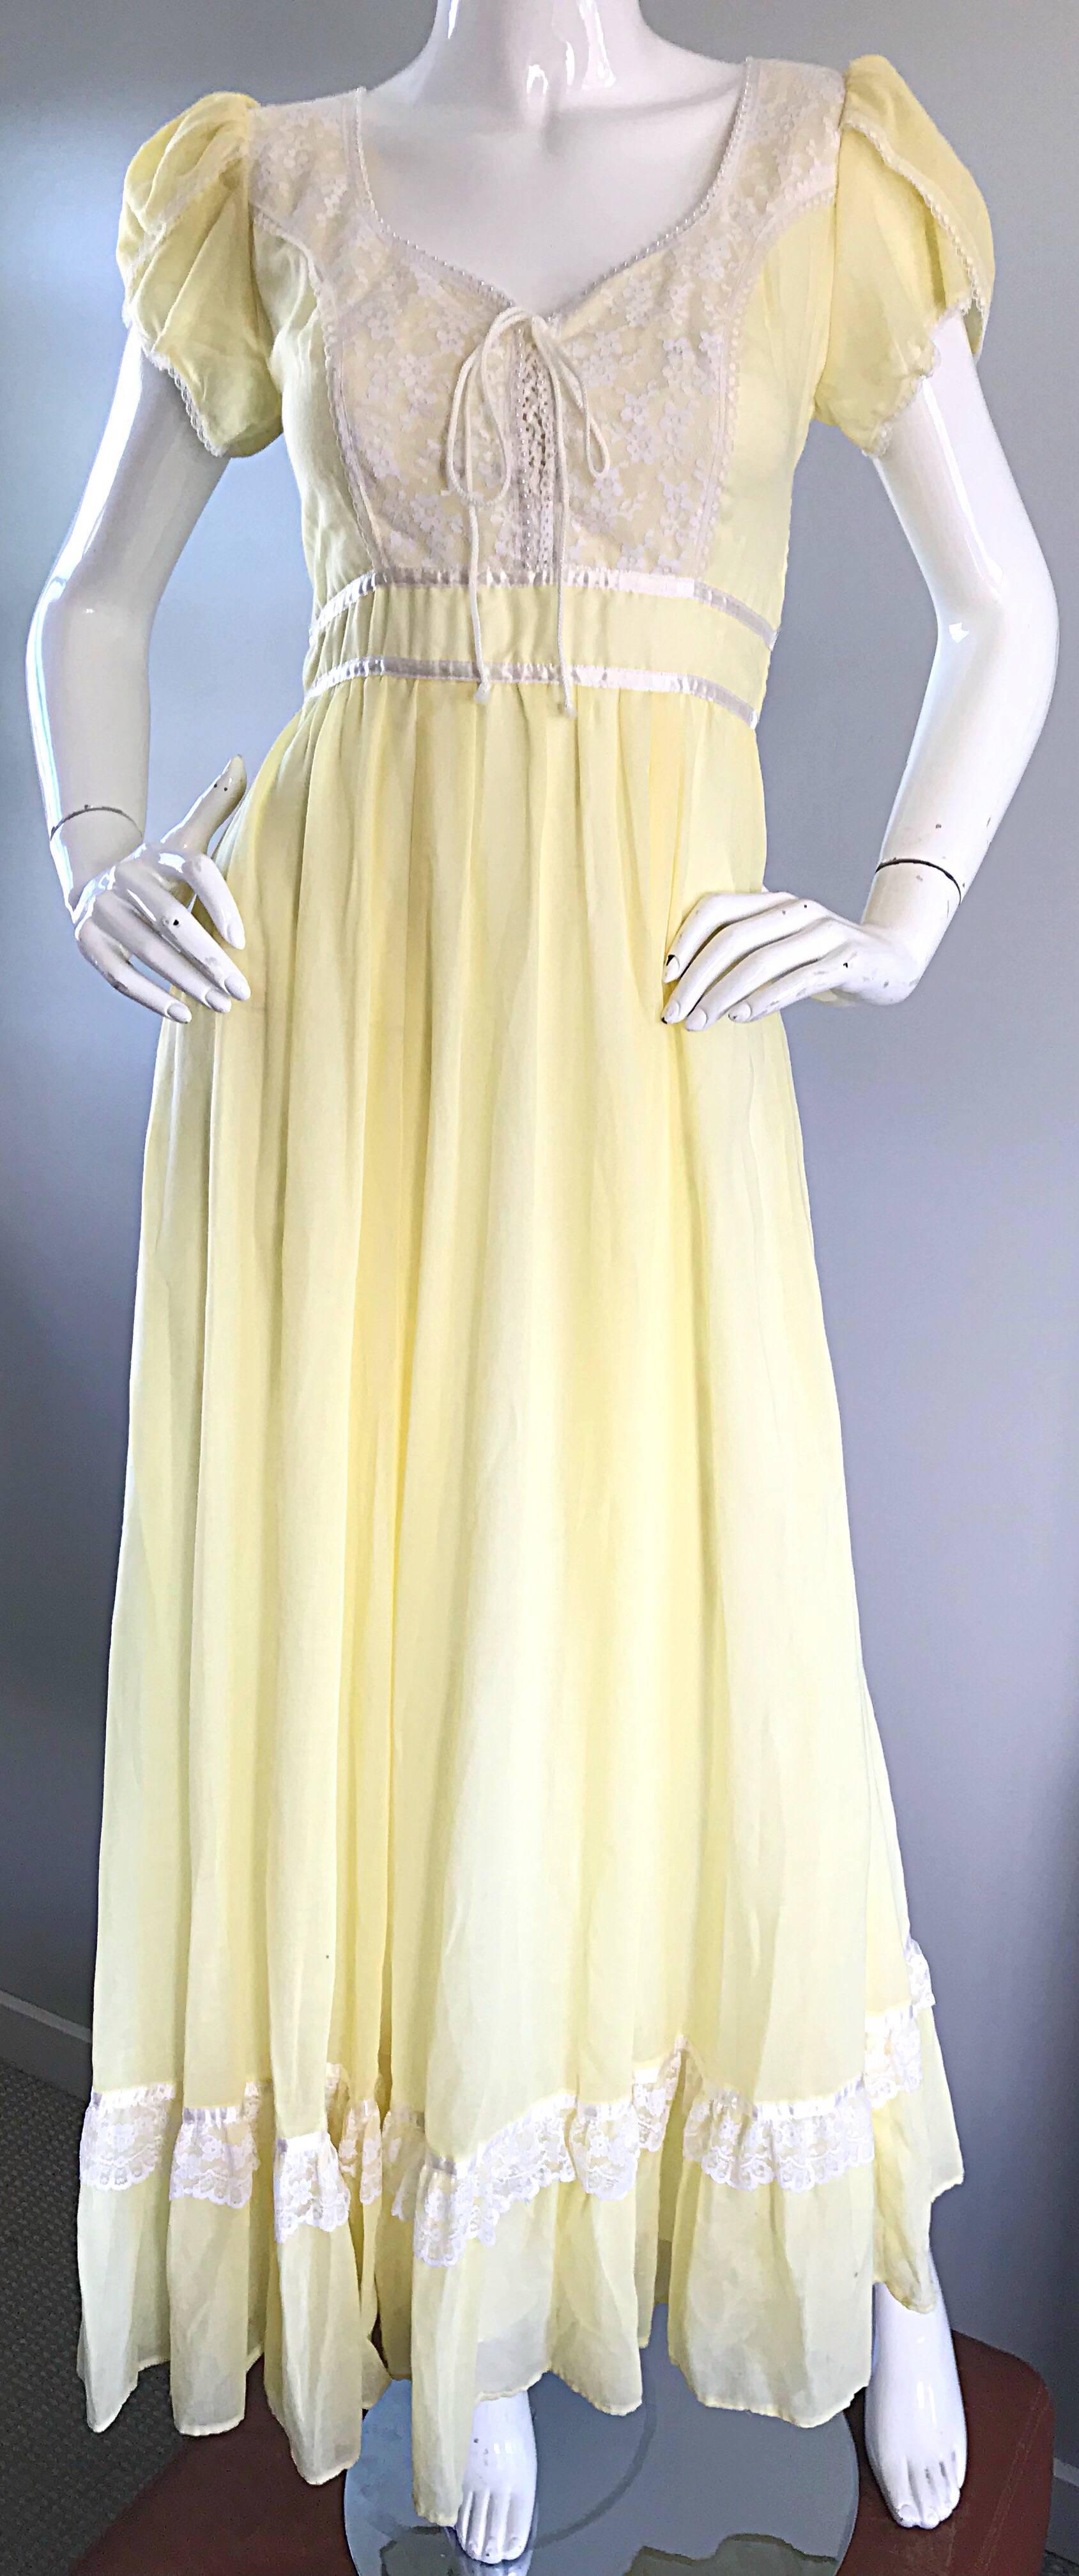 1970s Pale Yellow White Cotton Voile Pearl Encrusted Vintage 70s Boho Maxi Dress 1